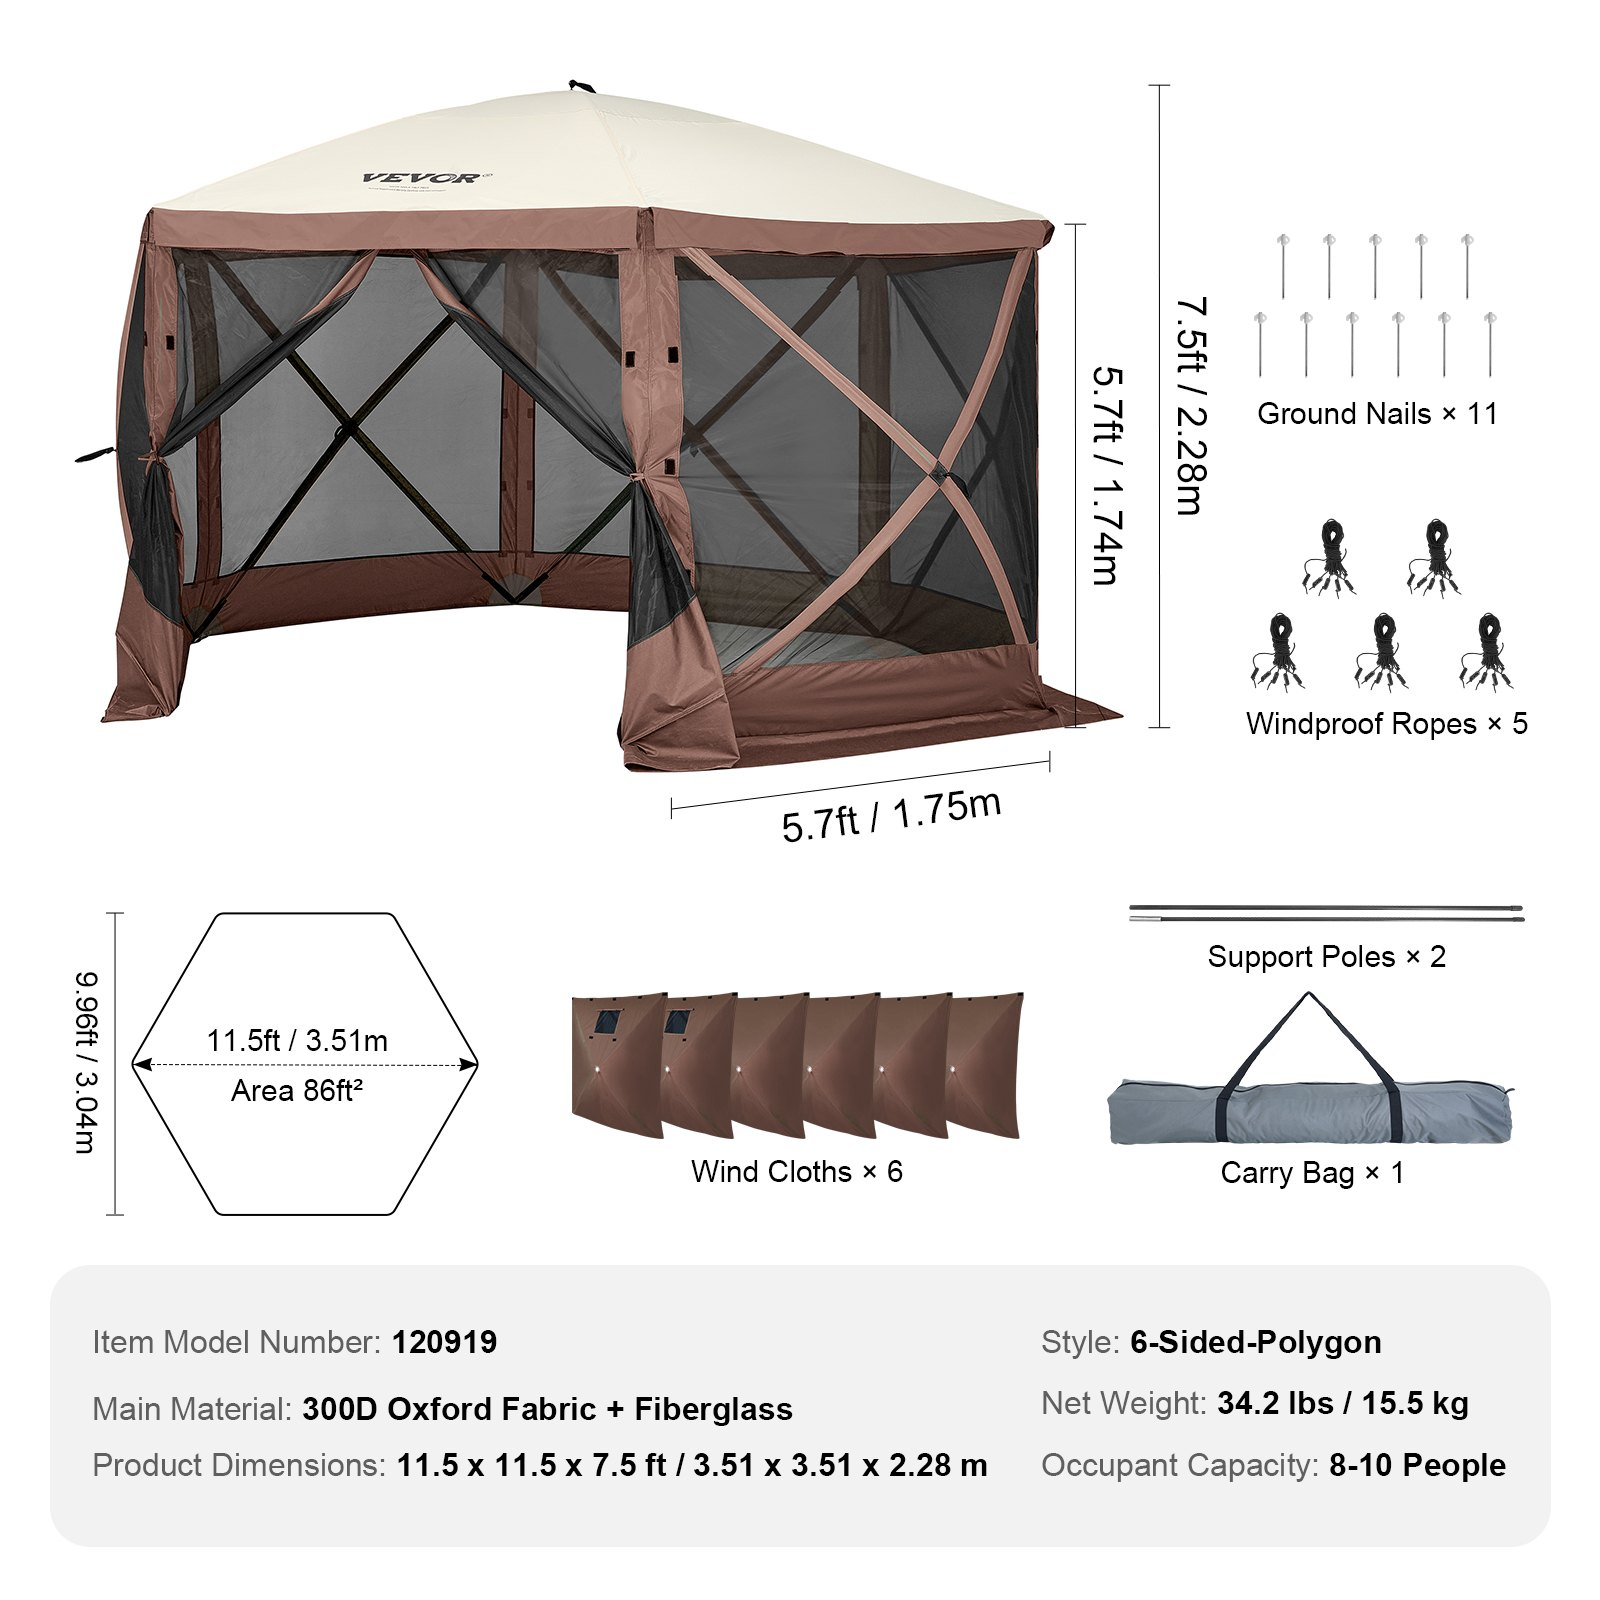 VEVOR Pop Up Gazebo Tent, Pop-Up Screen Tent 6 Sided Canopy Sun Shelter with 6 Removable Privacy Wind Cloths & Mesh Windows, 11.5x11.5FT Quick Set Screen Tent with Mosquito Netting, Brown, Goodies N Stuff